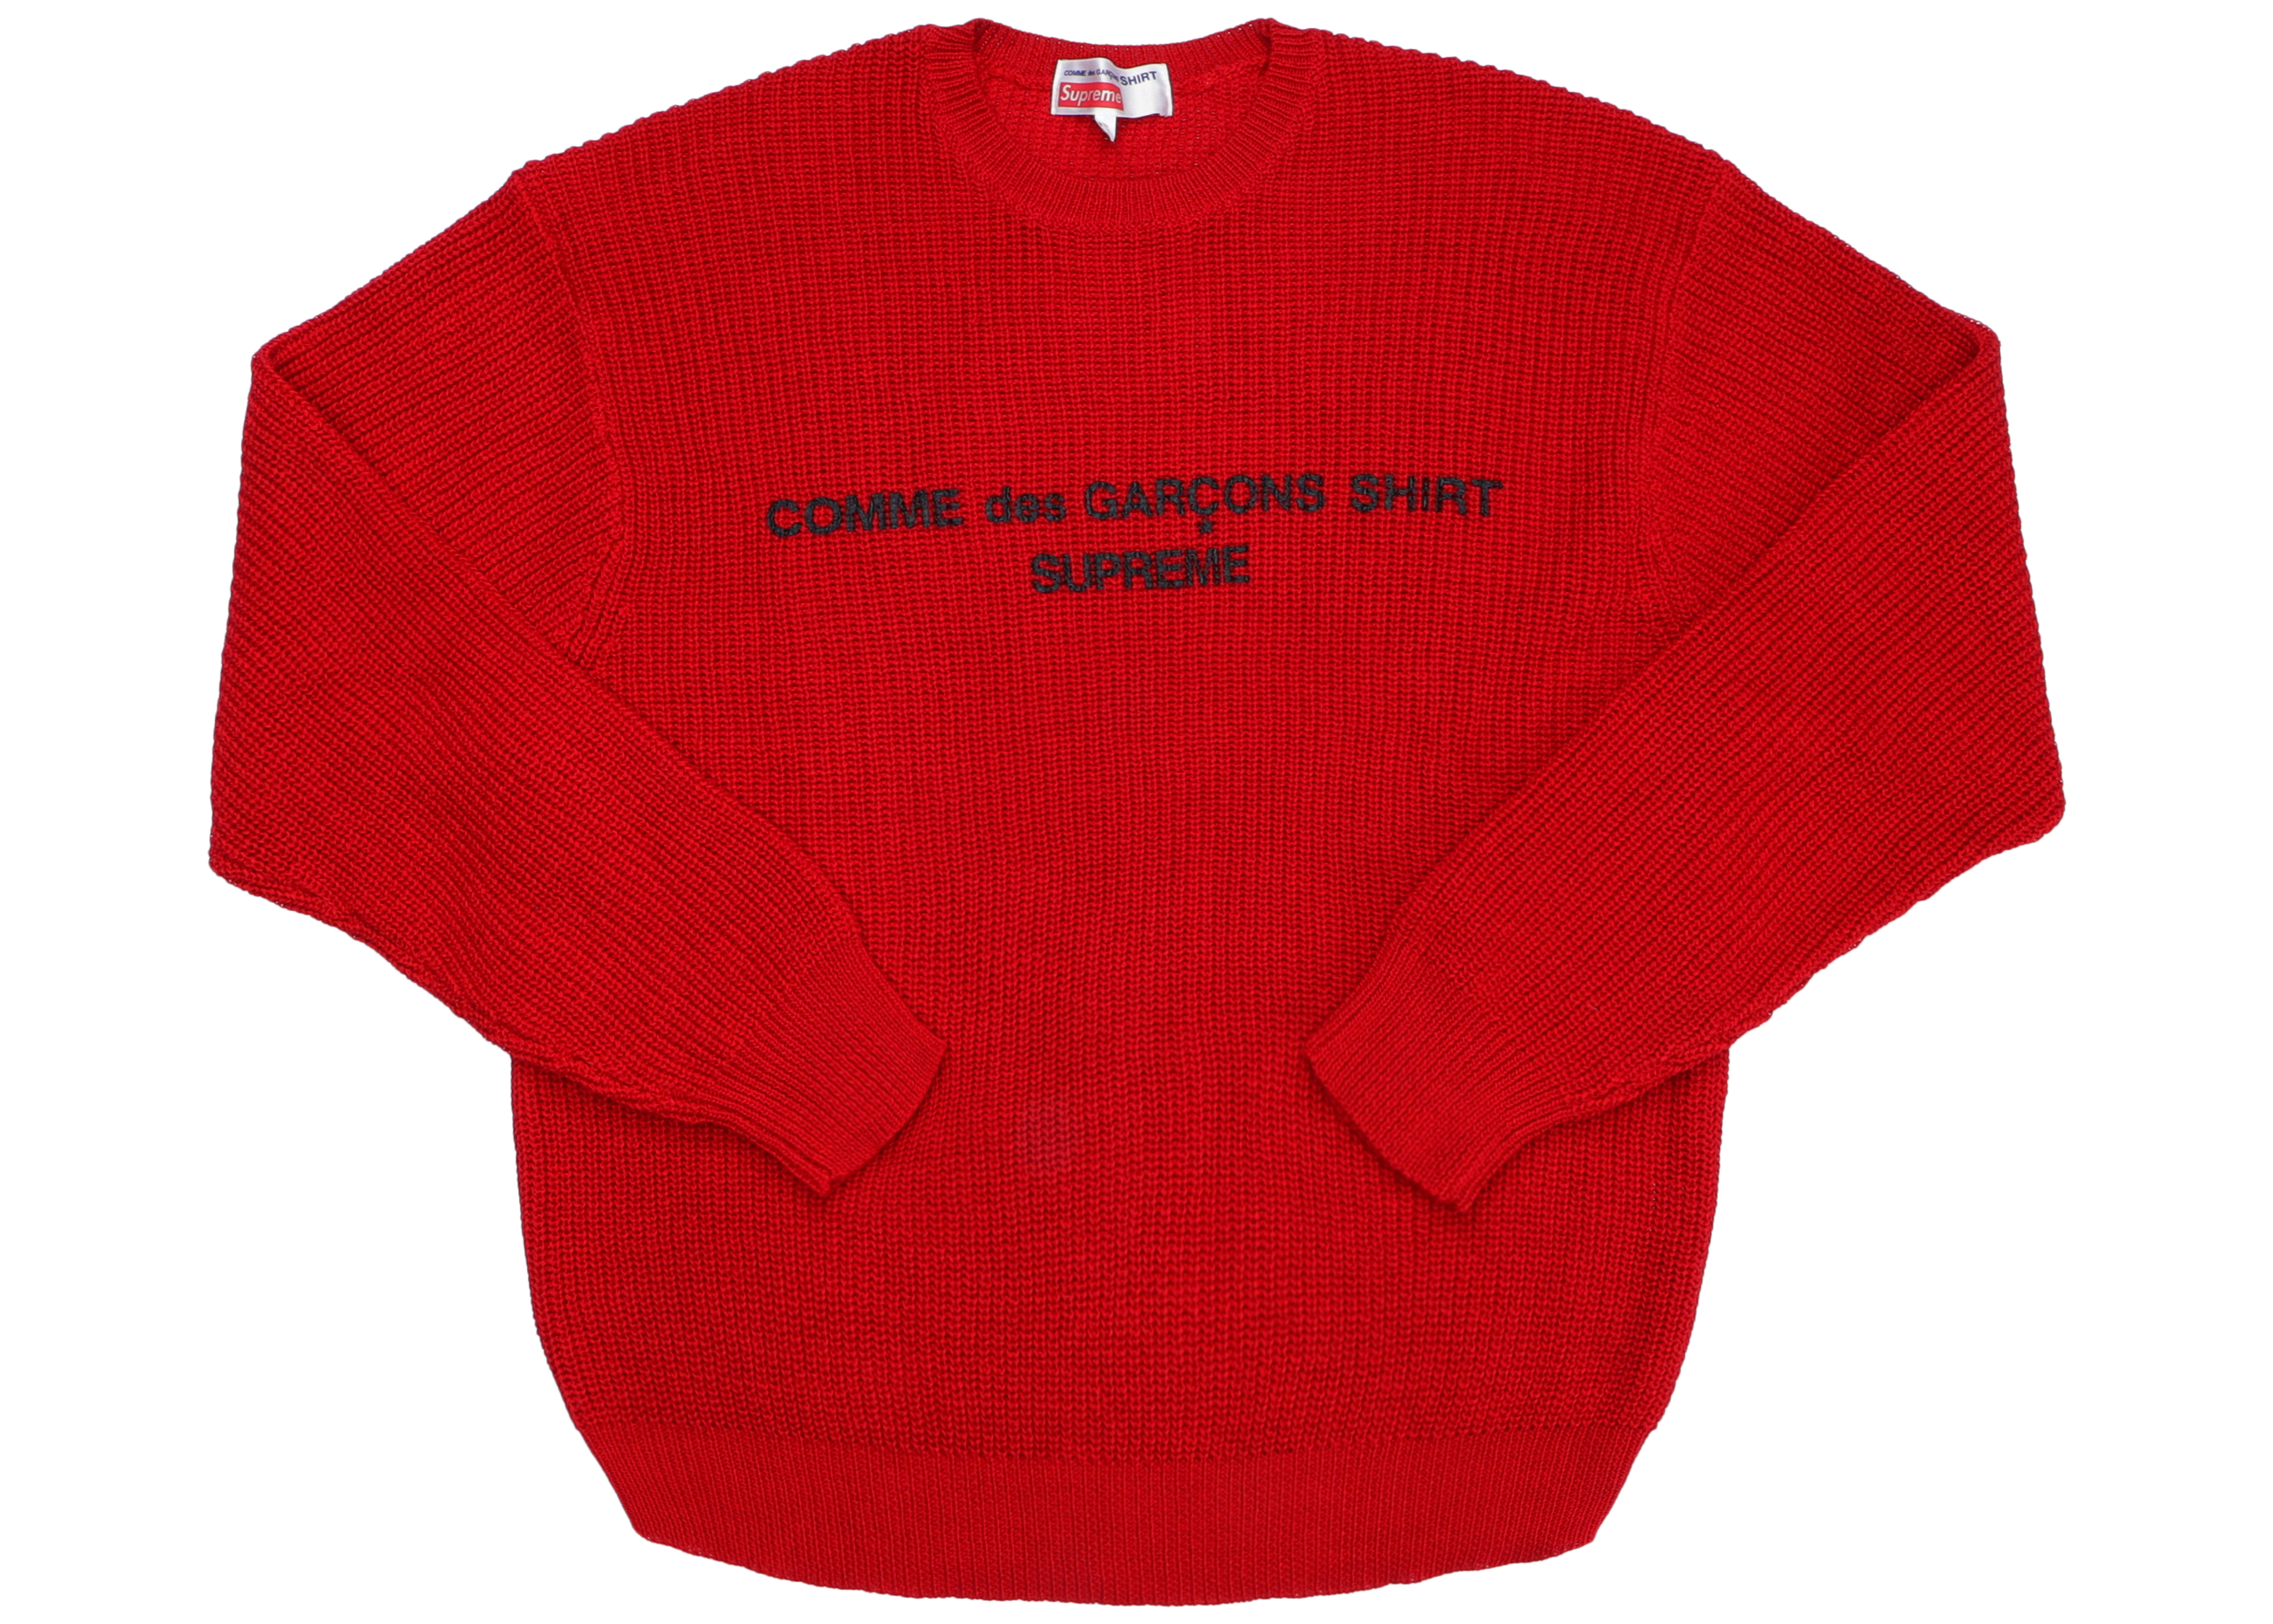 Supreme Comme des Garcons SHIRT Sweater Red - FW18 メンズ - JP